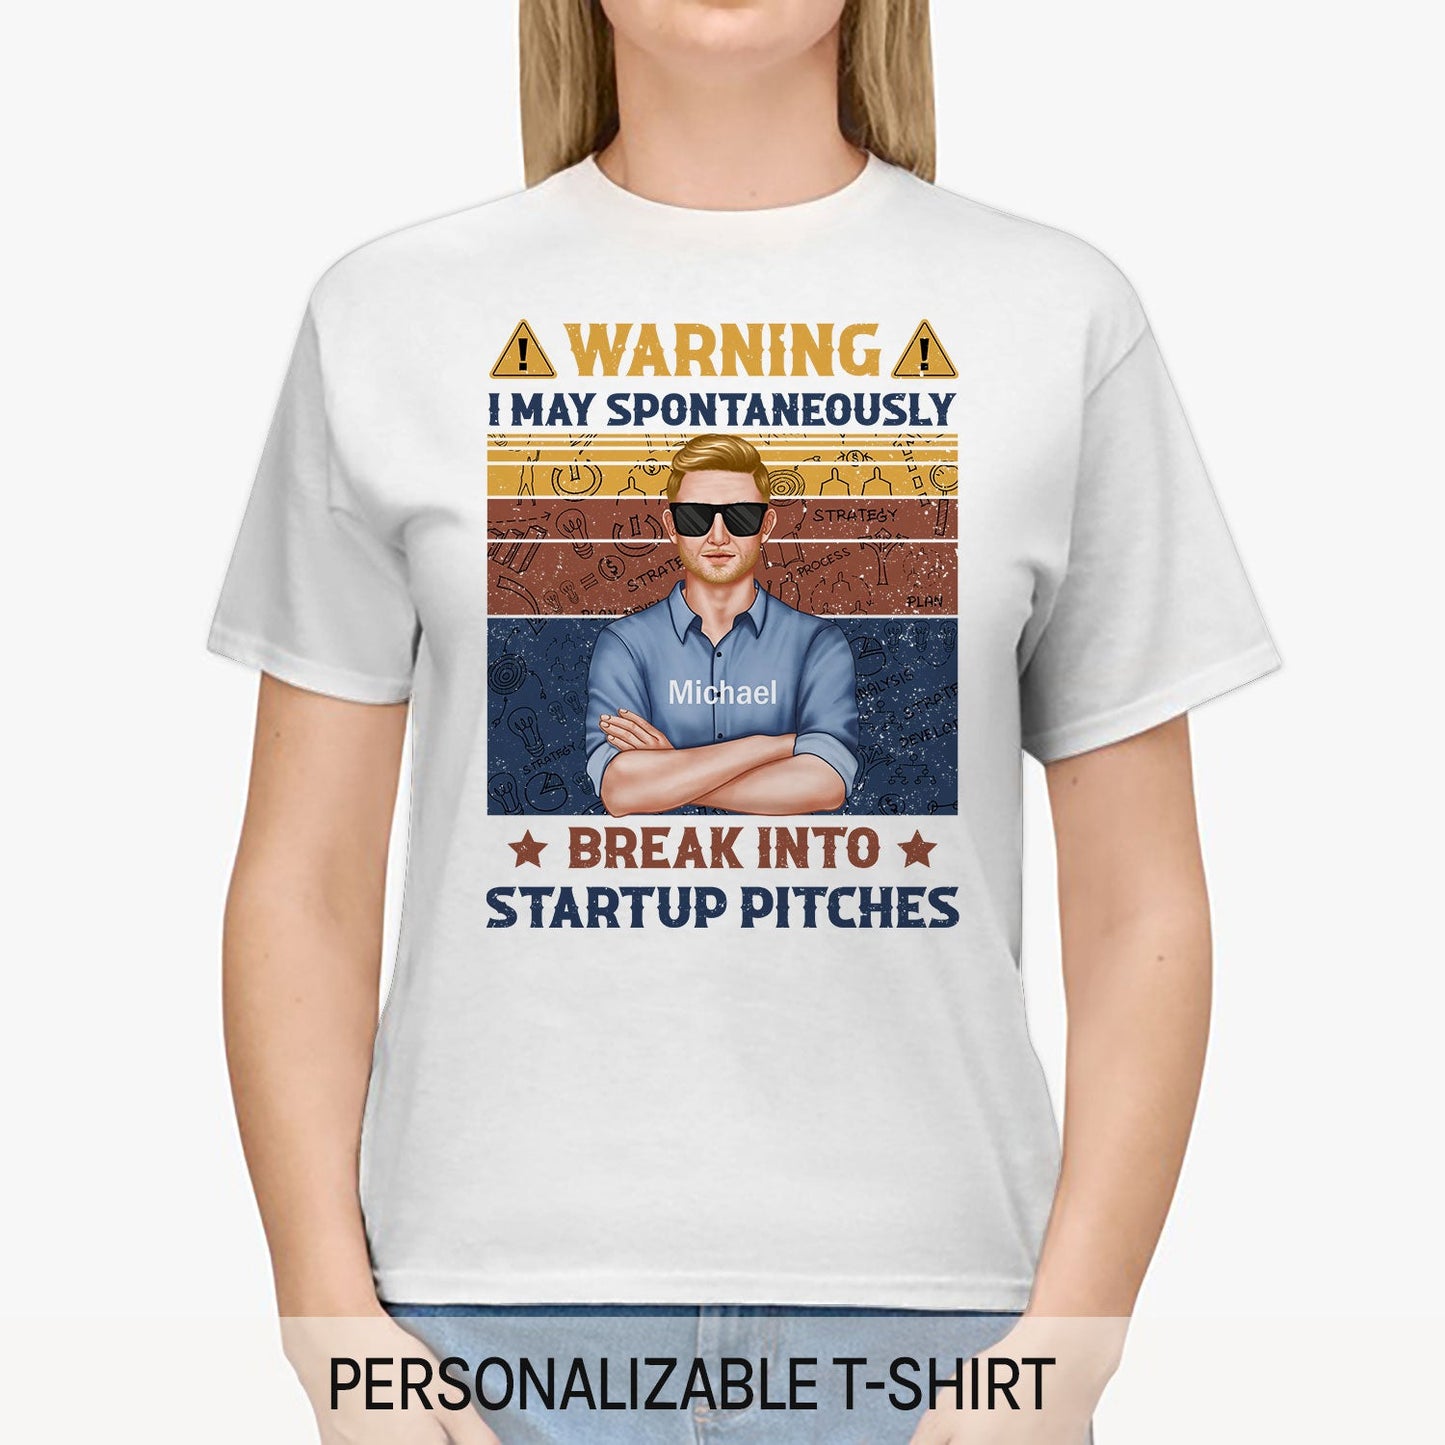 Warning: I may spontaneously break into startup pitches - Personalized Birthday gift for Startup Founder - Custom Tshirt - MyMindfulGifts